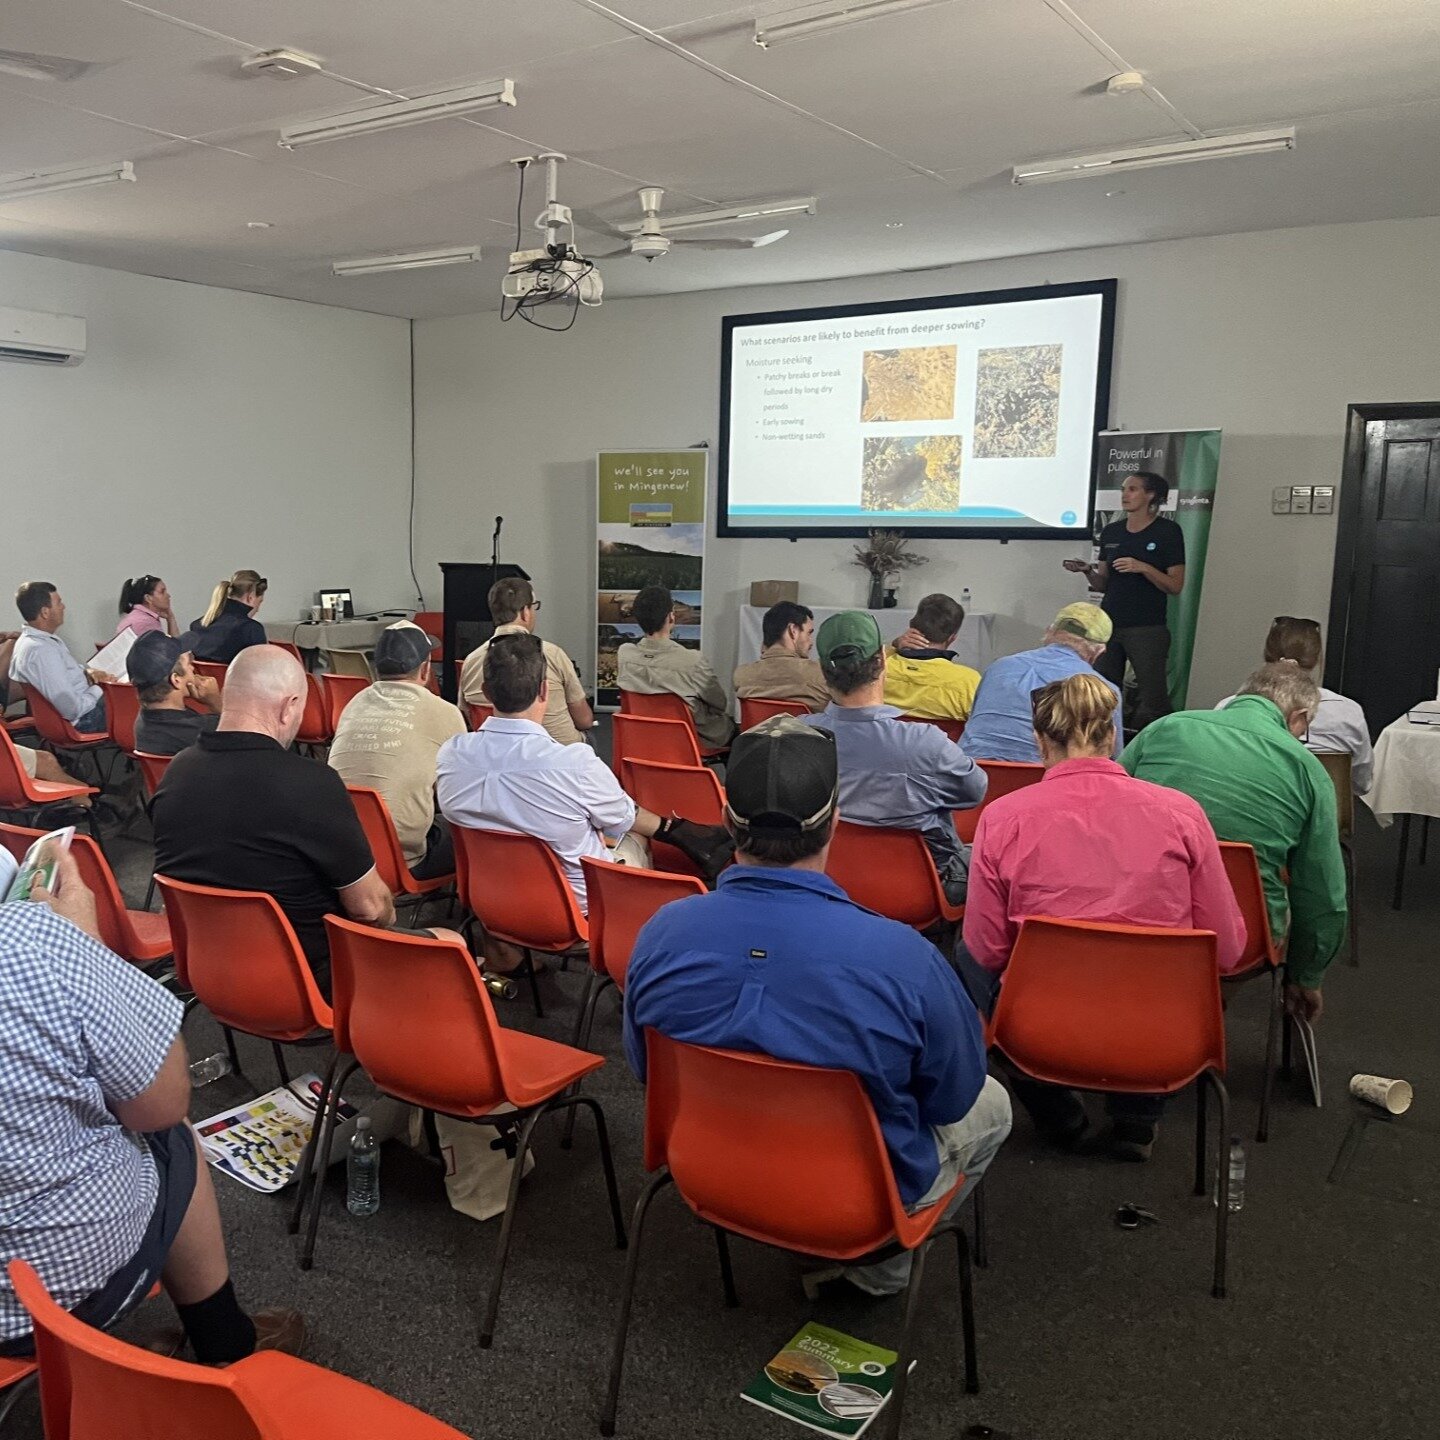 What an exciting turn out for our 2023 Trials Review Day last Wednesday! The team at MIG would like to extend a huge thankyou to all of our amazing presenters and to everyone who attended the day contributing to its success. Also, a special thank you